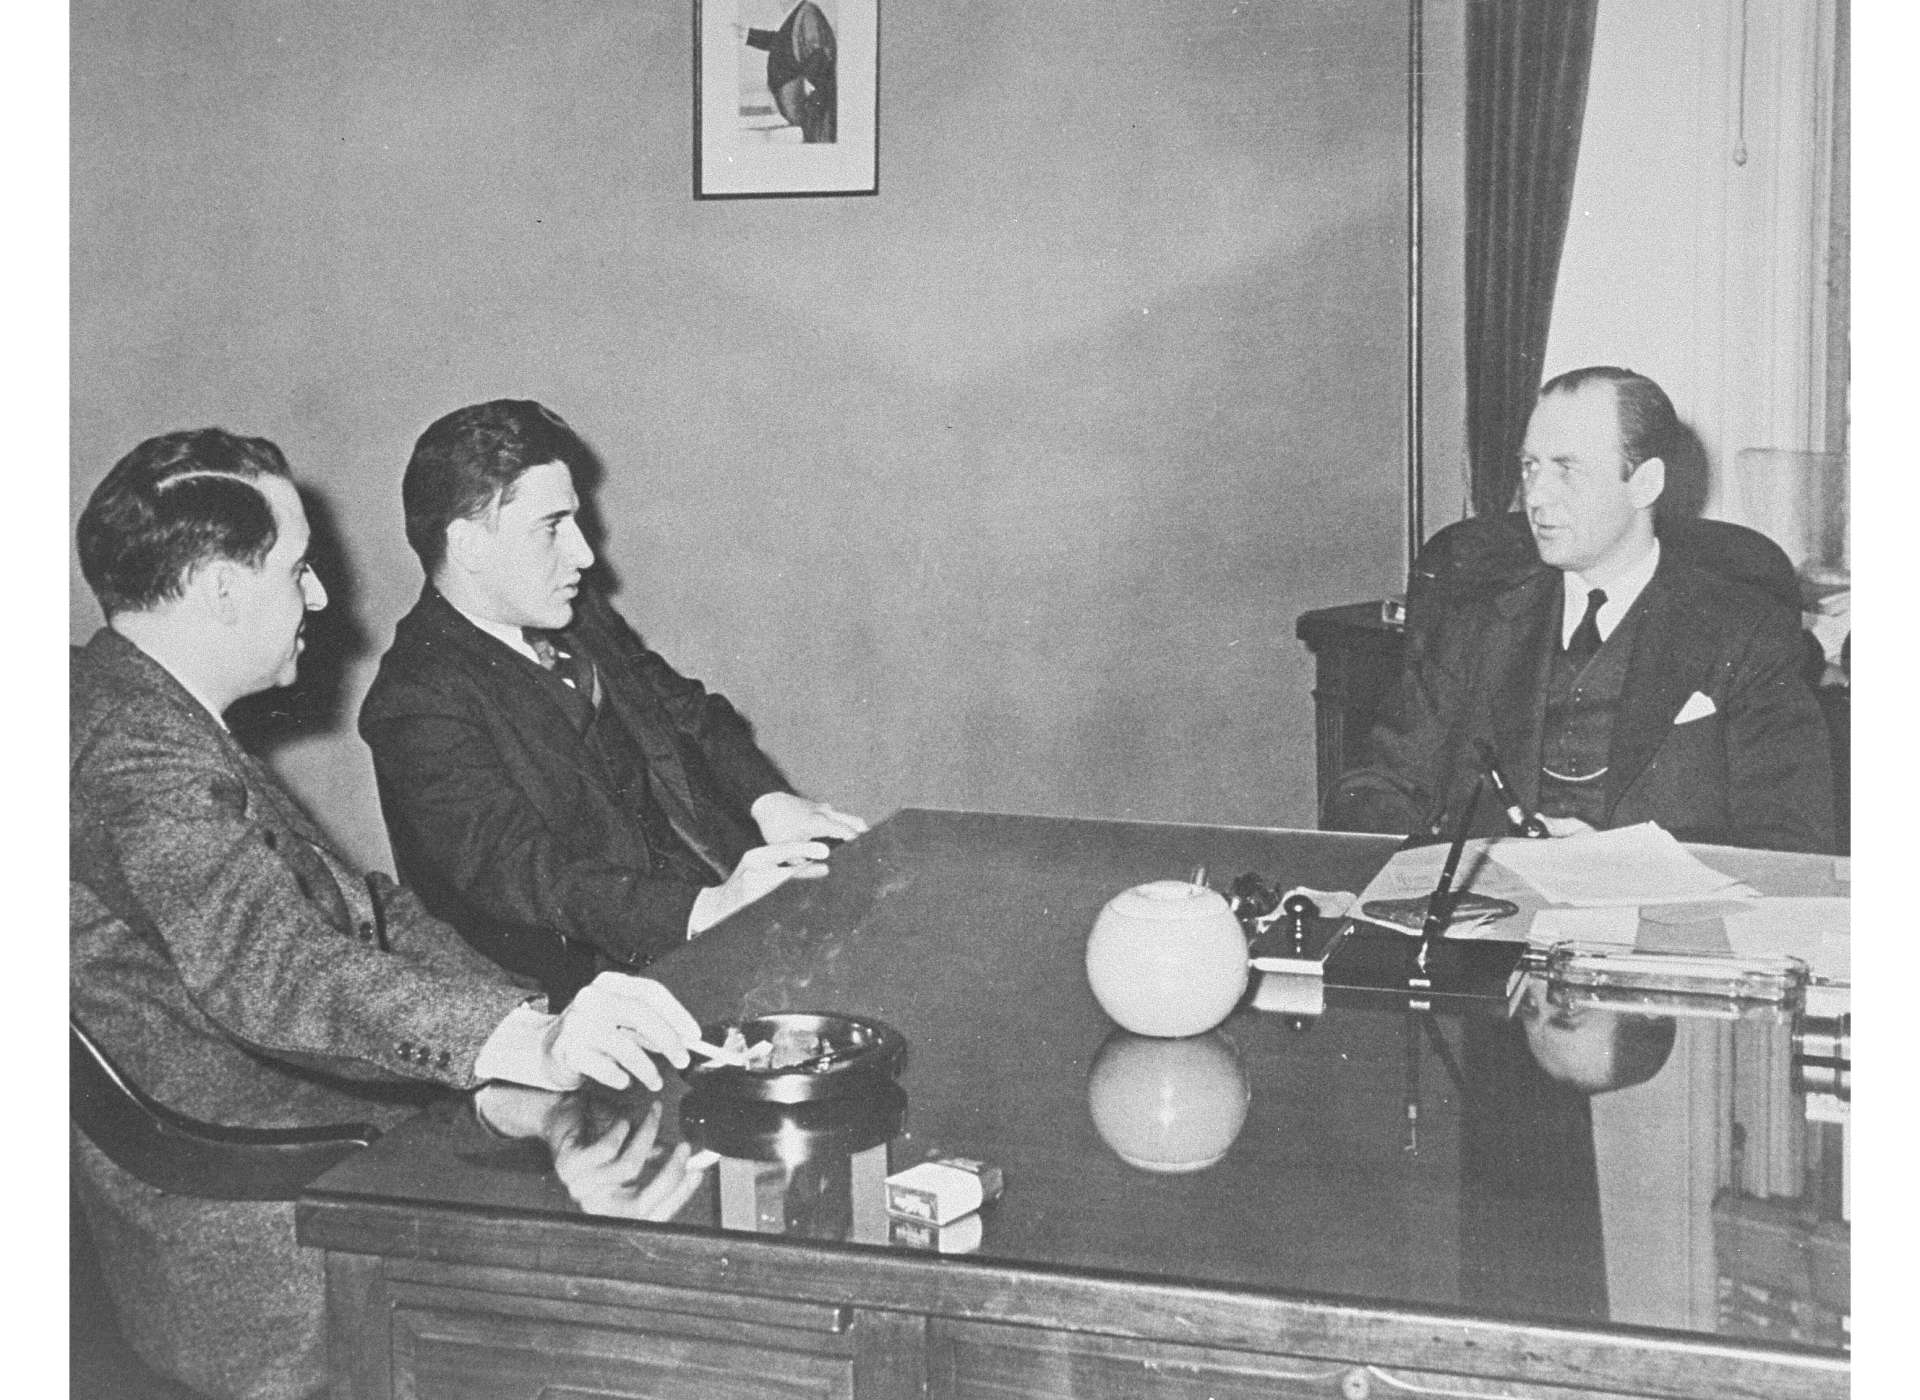 Members of the War Refugee Board staff (left to right, Albert Abrahamson, Josiah DuBois, and WRB director John Pehle) meet in Pehle’s office at the Treasury Department, March 1944. USHMM